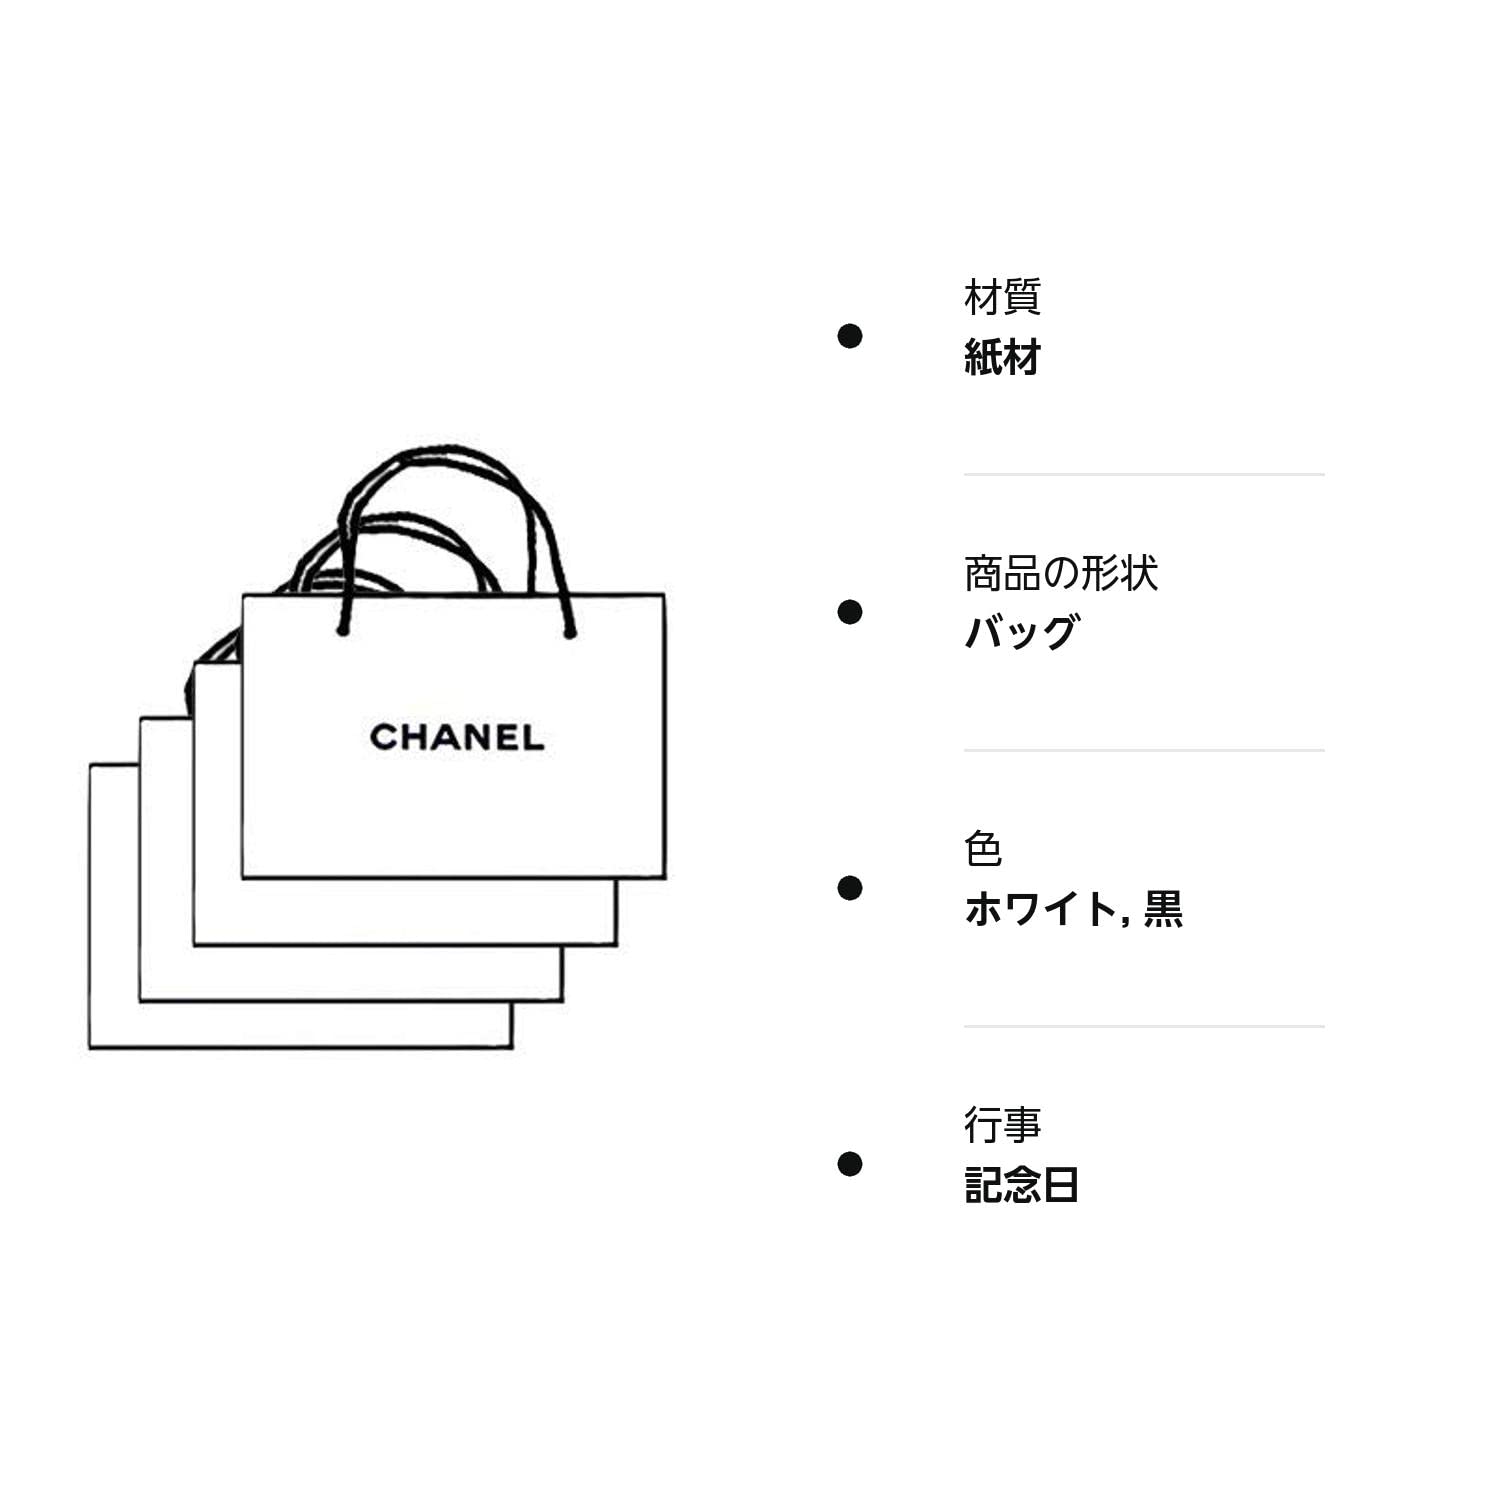 Shop authentic Chanel Deauville Small Shopper Tote Bag at revogue for just  USD 400000